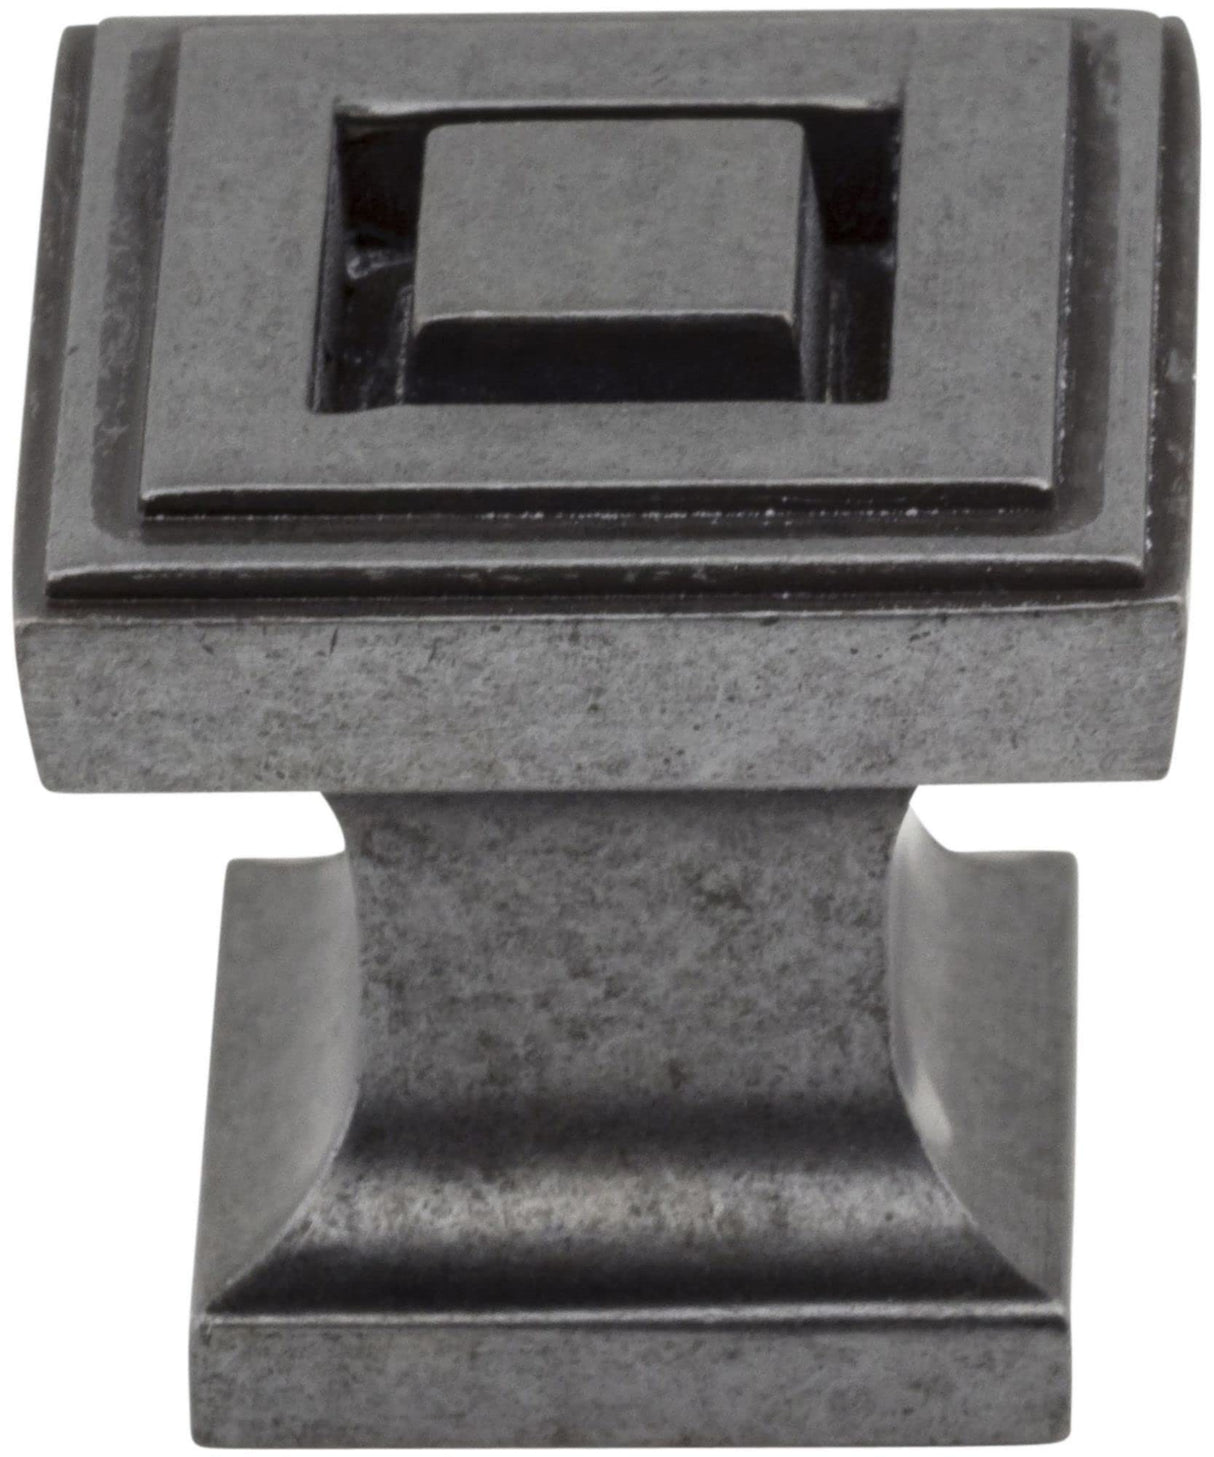 Jeffrey Alexander 585DBAC 1" Overall Length Brushed Oil Rubbed Bronze Square Delmar Cabinet Knob